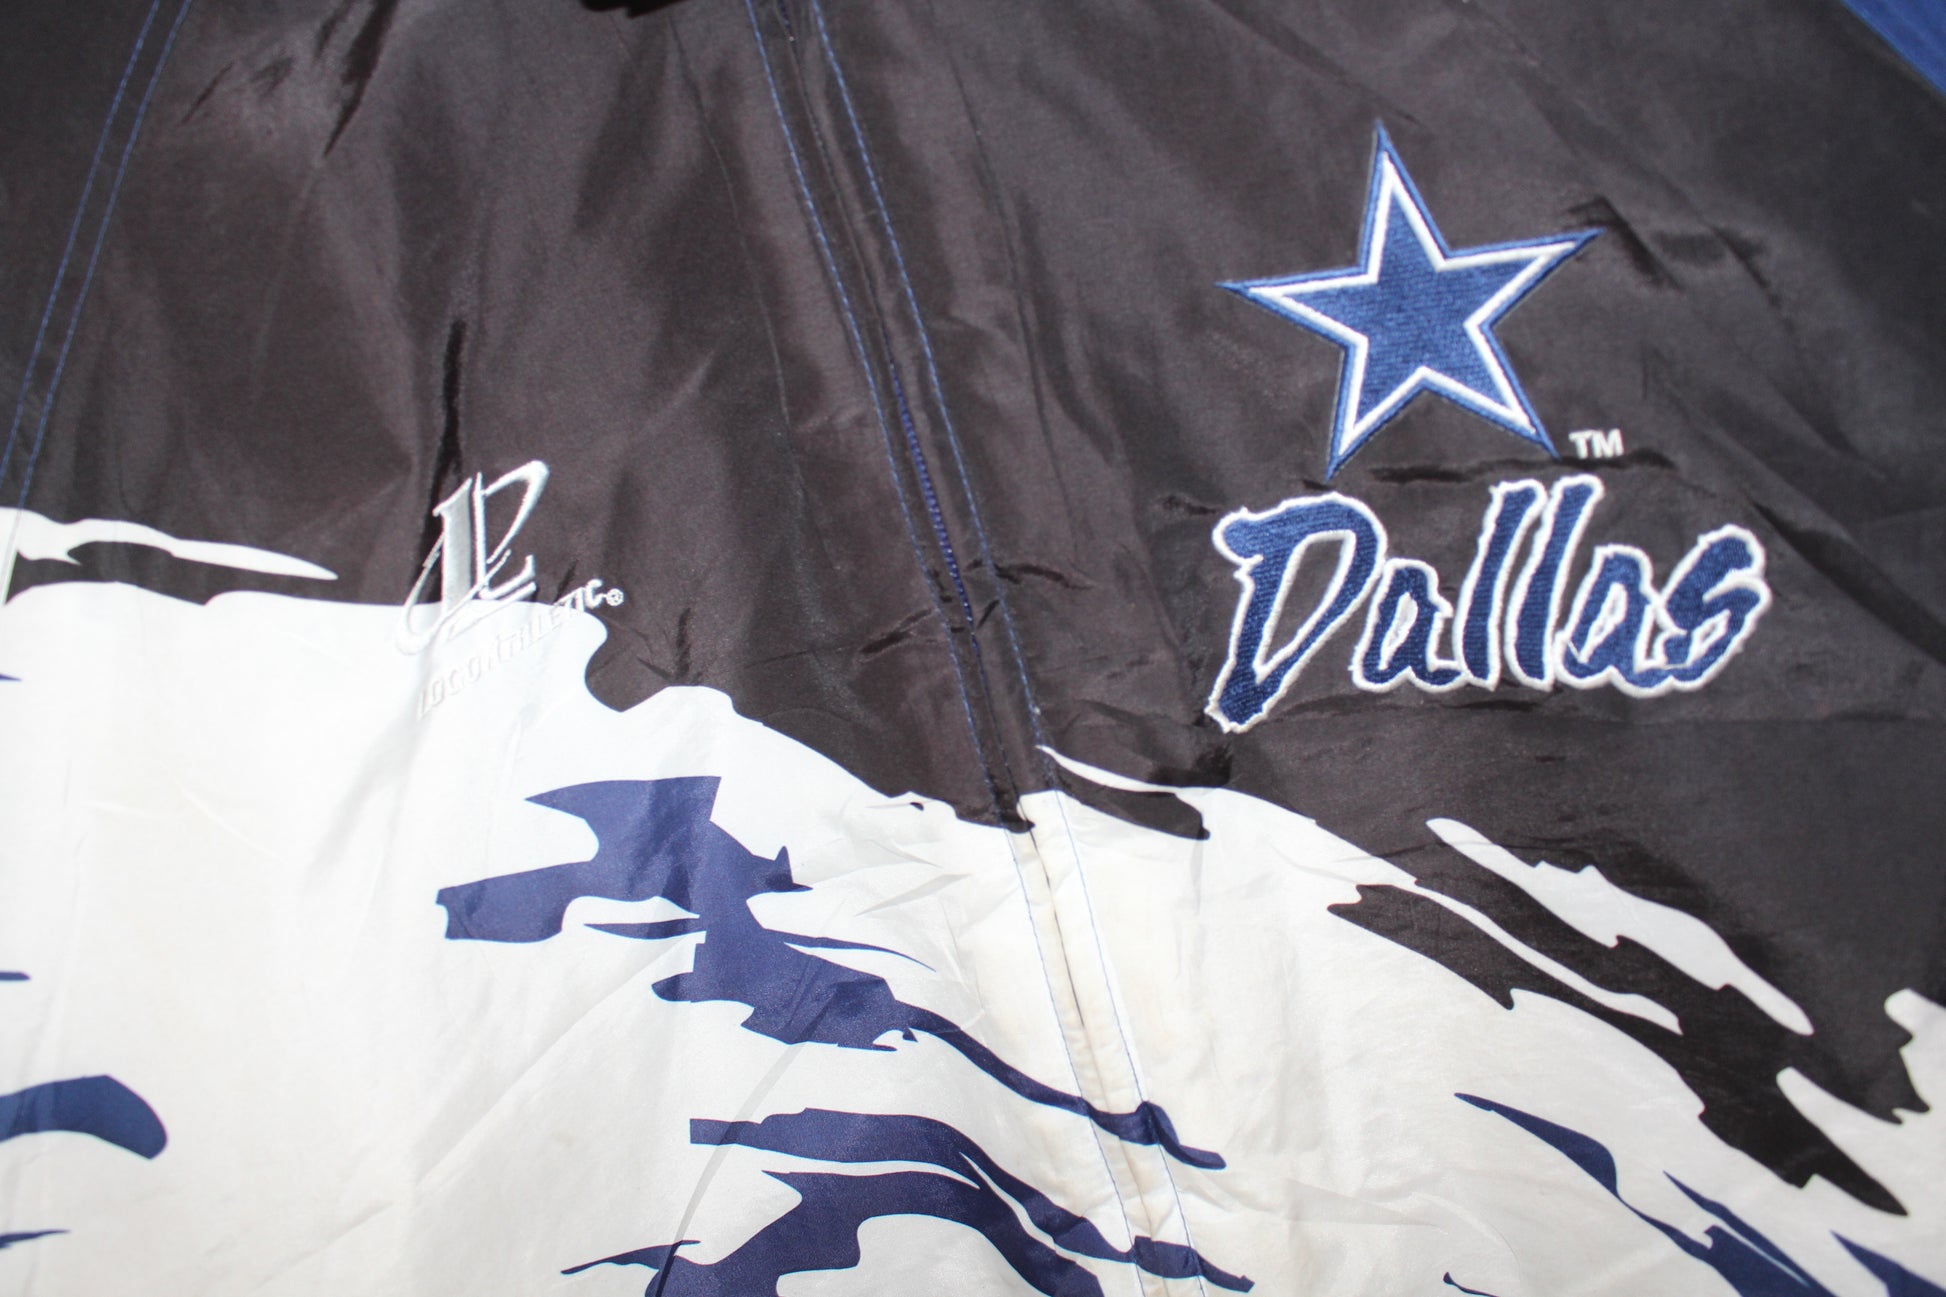 Dallas Cowboys Primary Team Star Logo Patch - Maker of Jacket